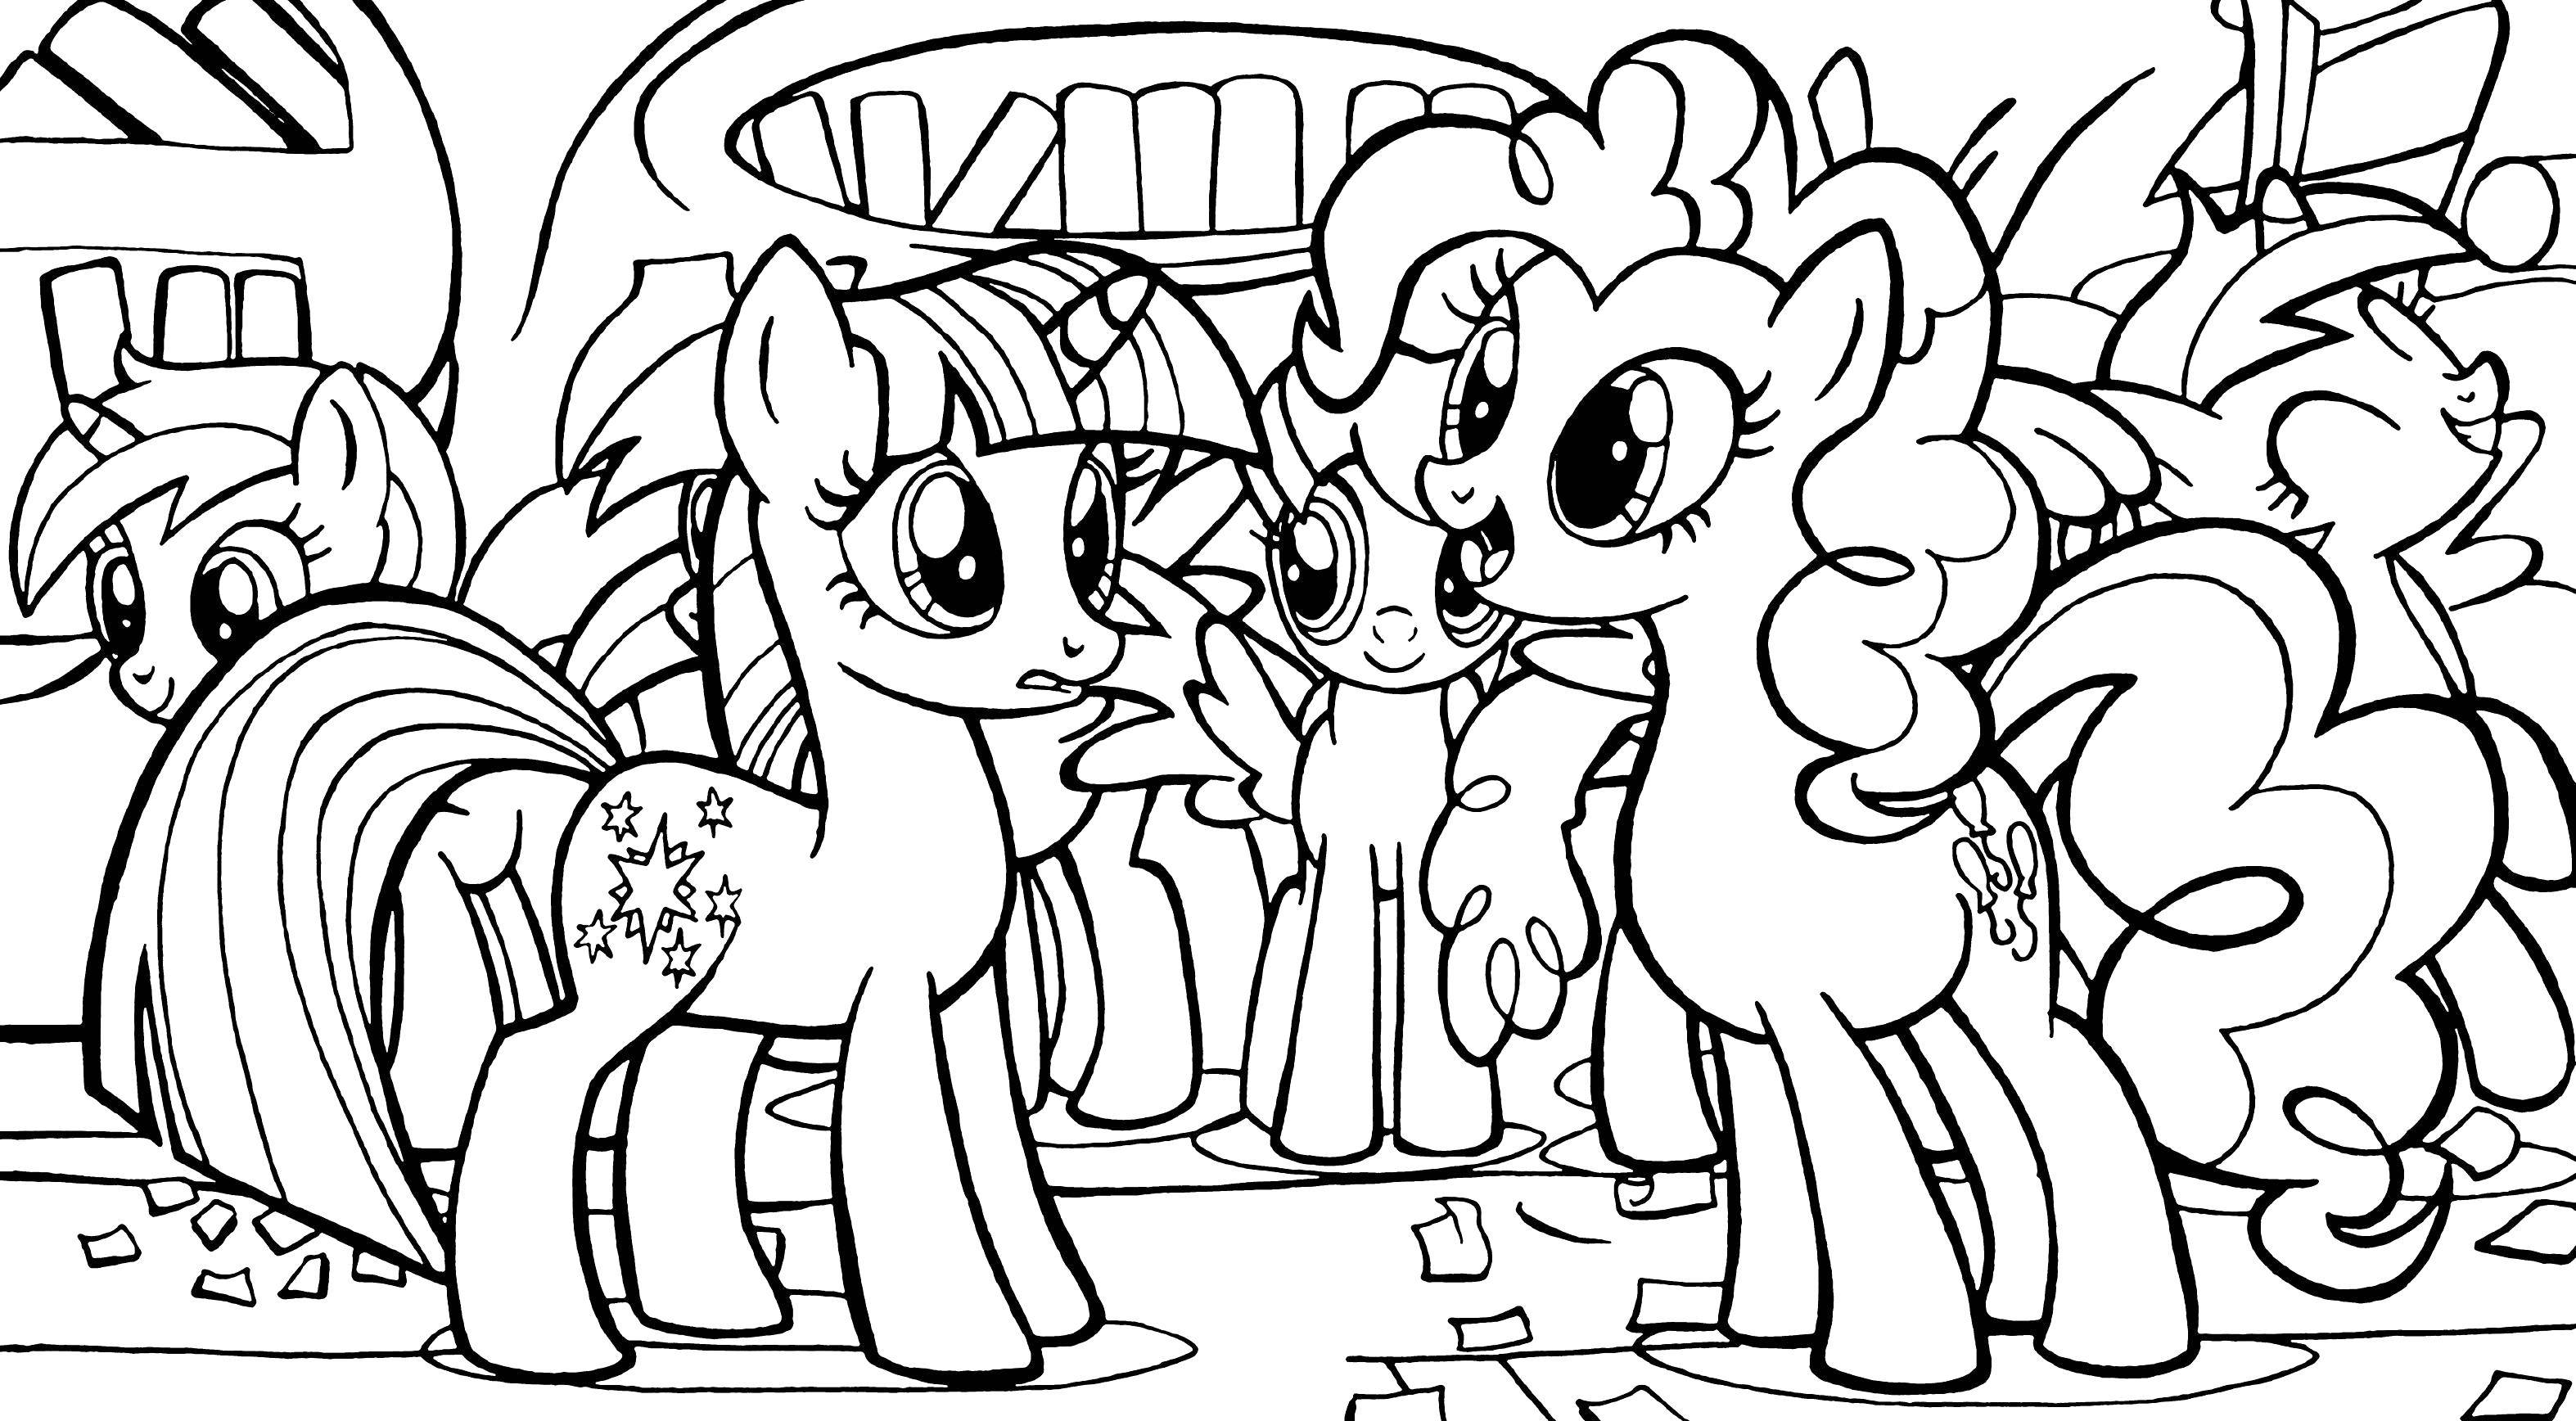 Coloring Fun company pony. Category Ponies. Tags:  Pony, My little pony.